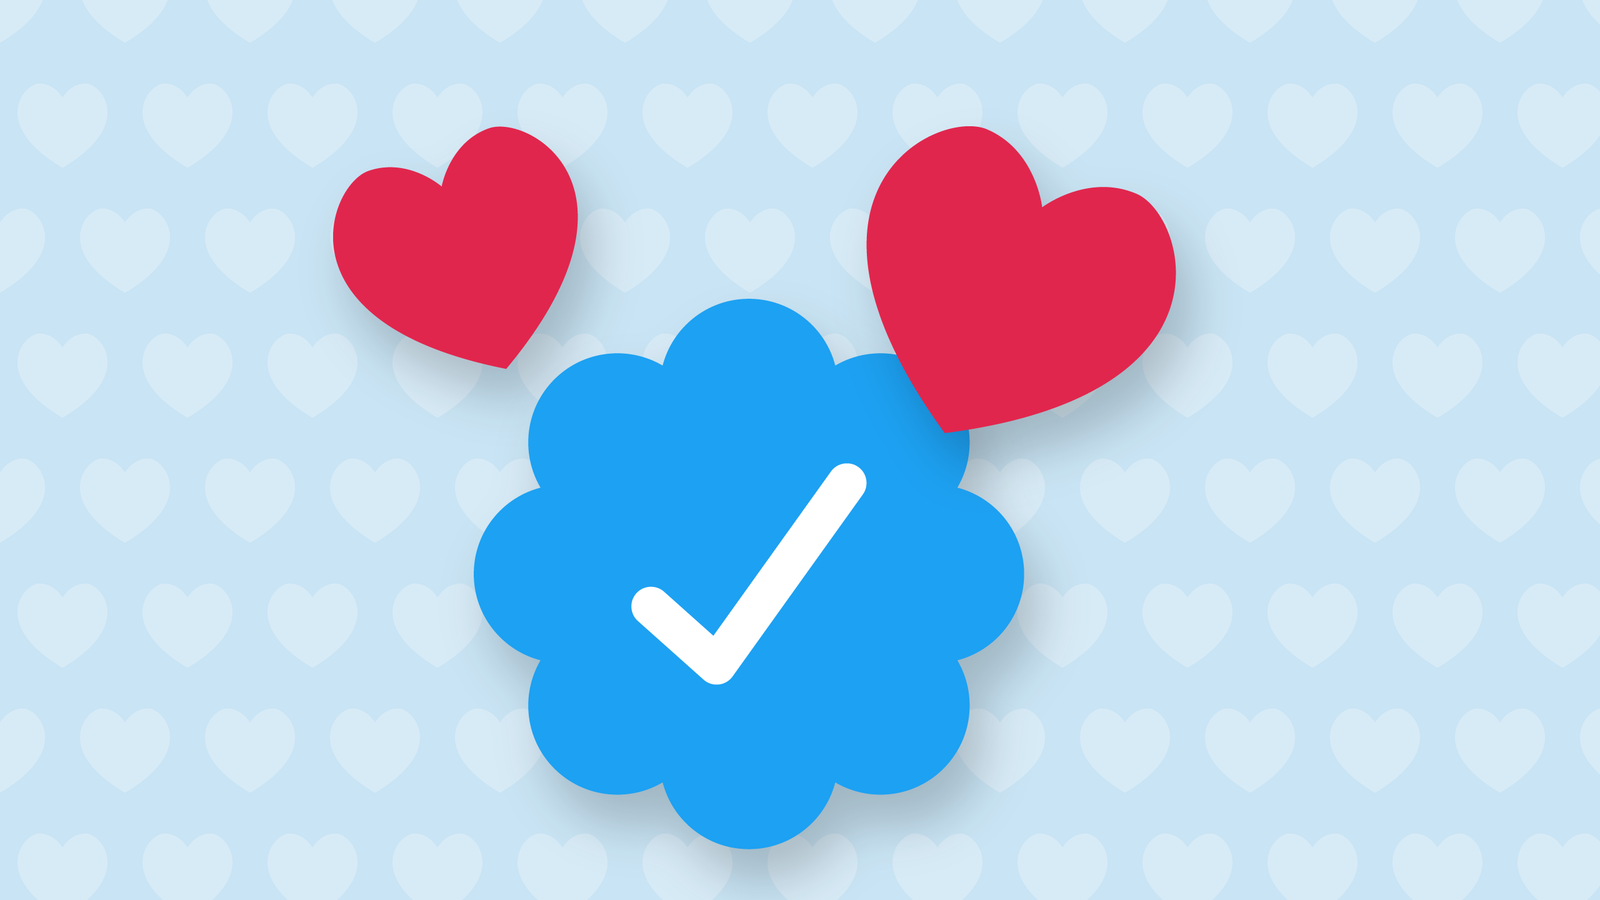 Blue is a dating app for verified Twitter users | TechCrunch